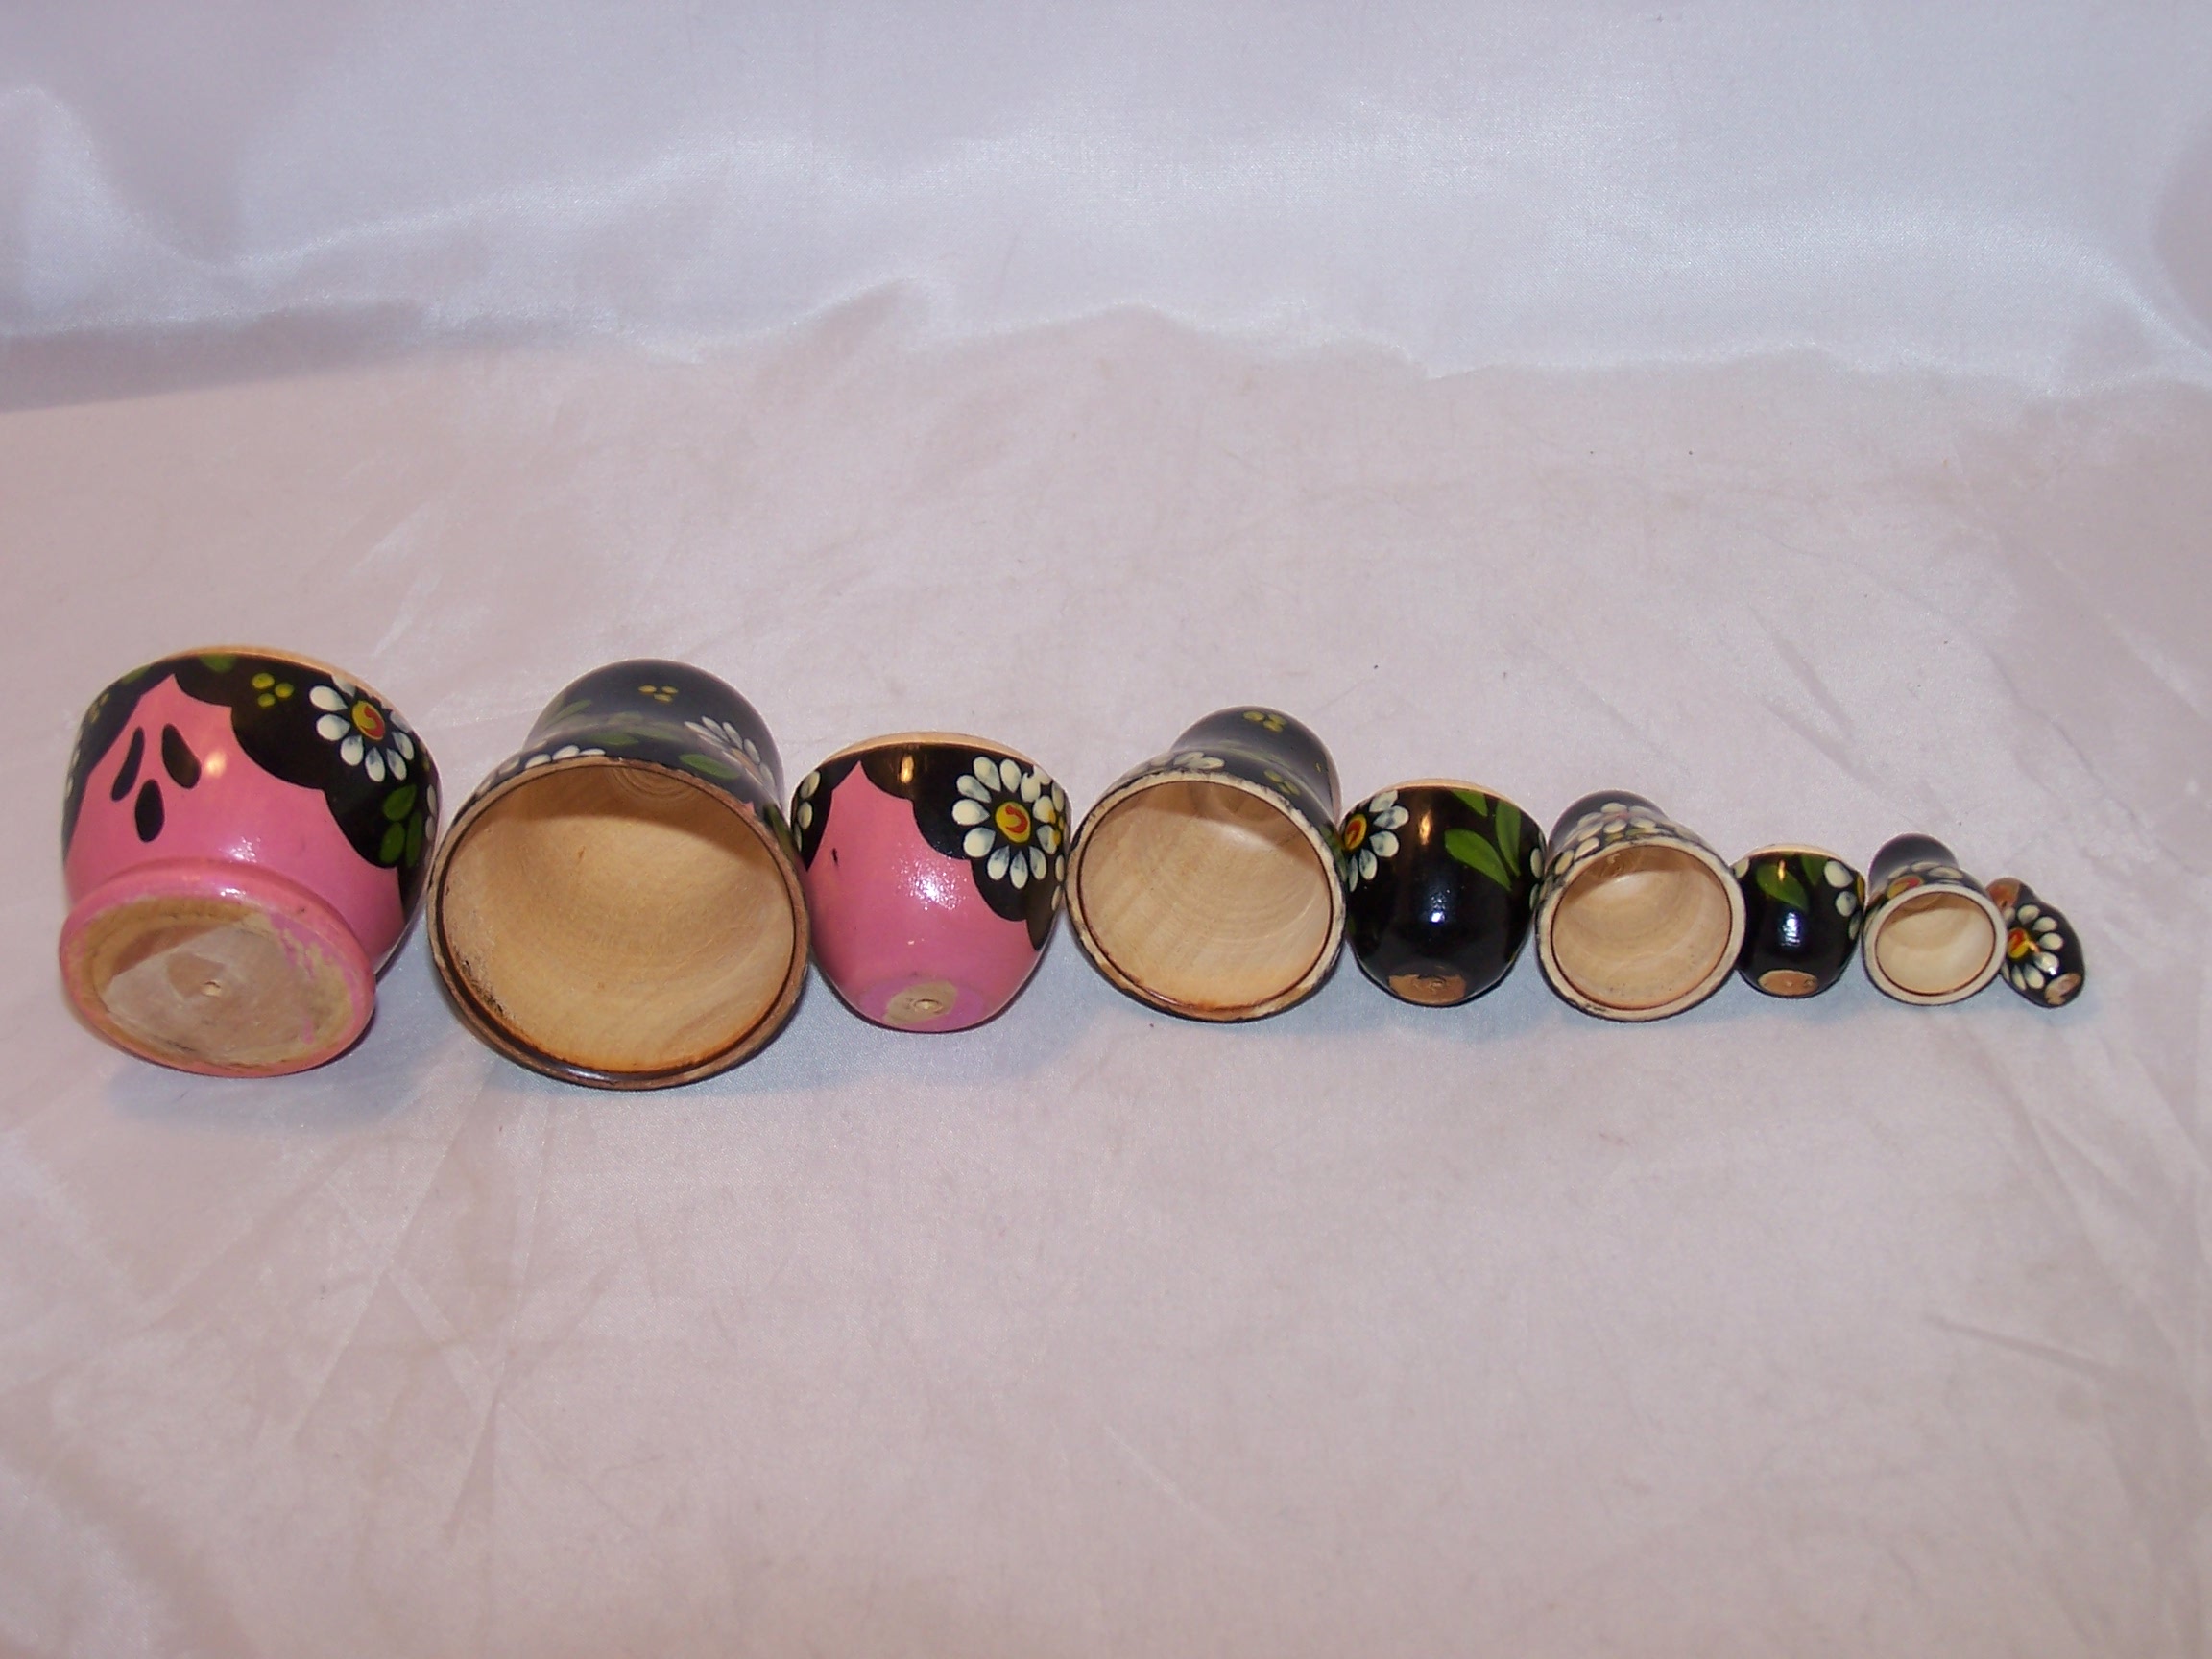 Image 6 of Nesting Doll in Black, Pink w Daisies, 5 Levels, Wood